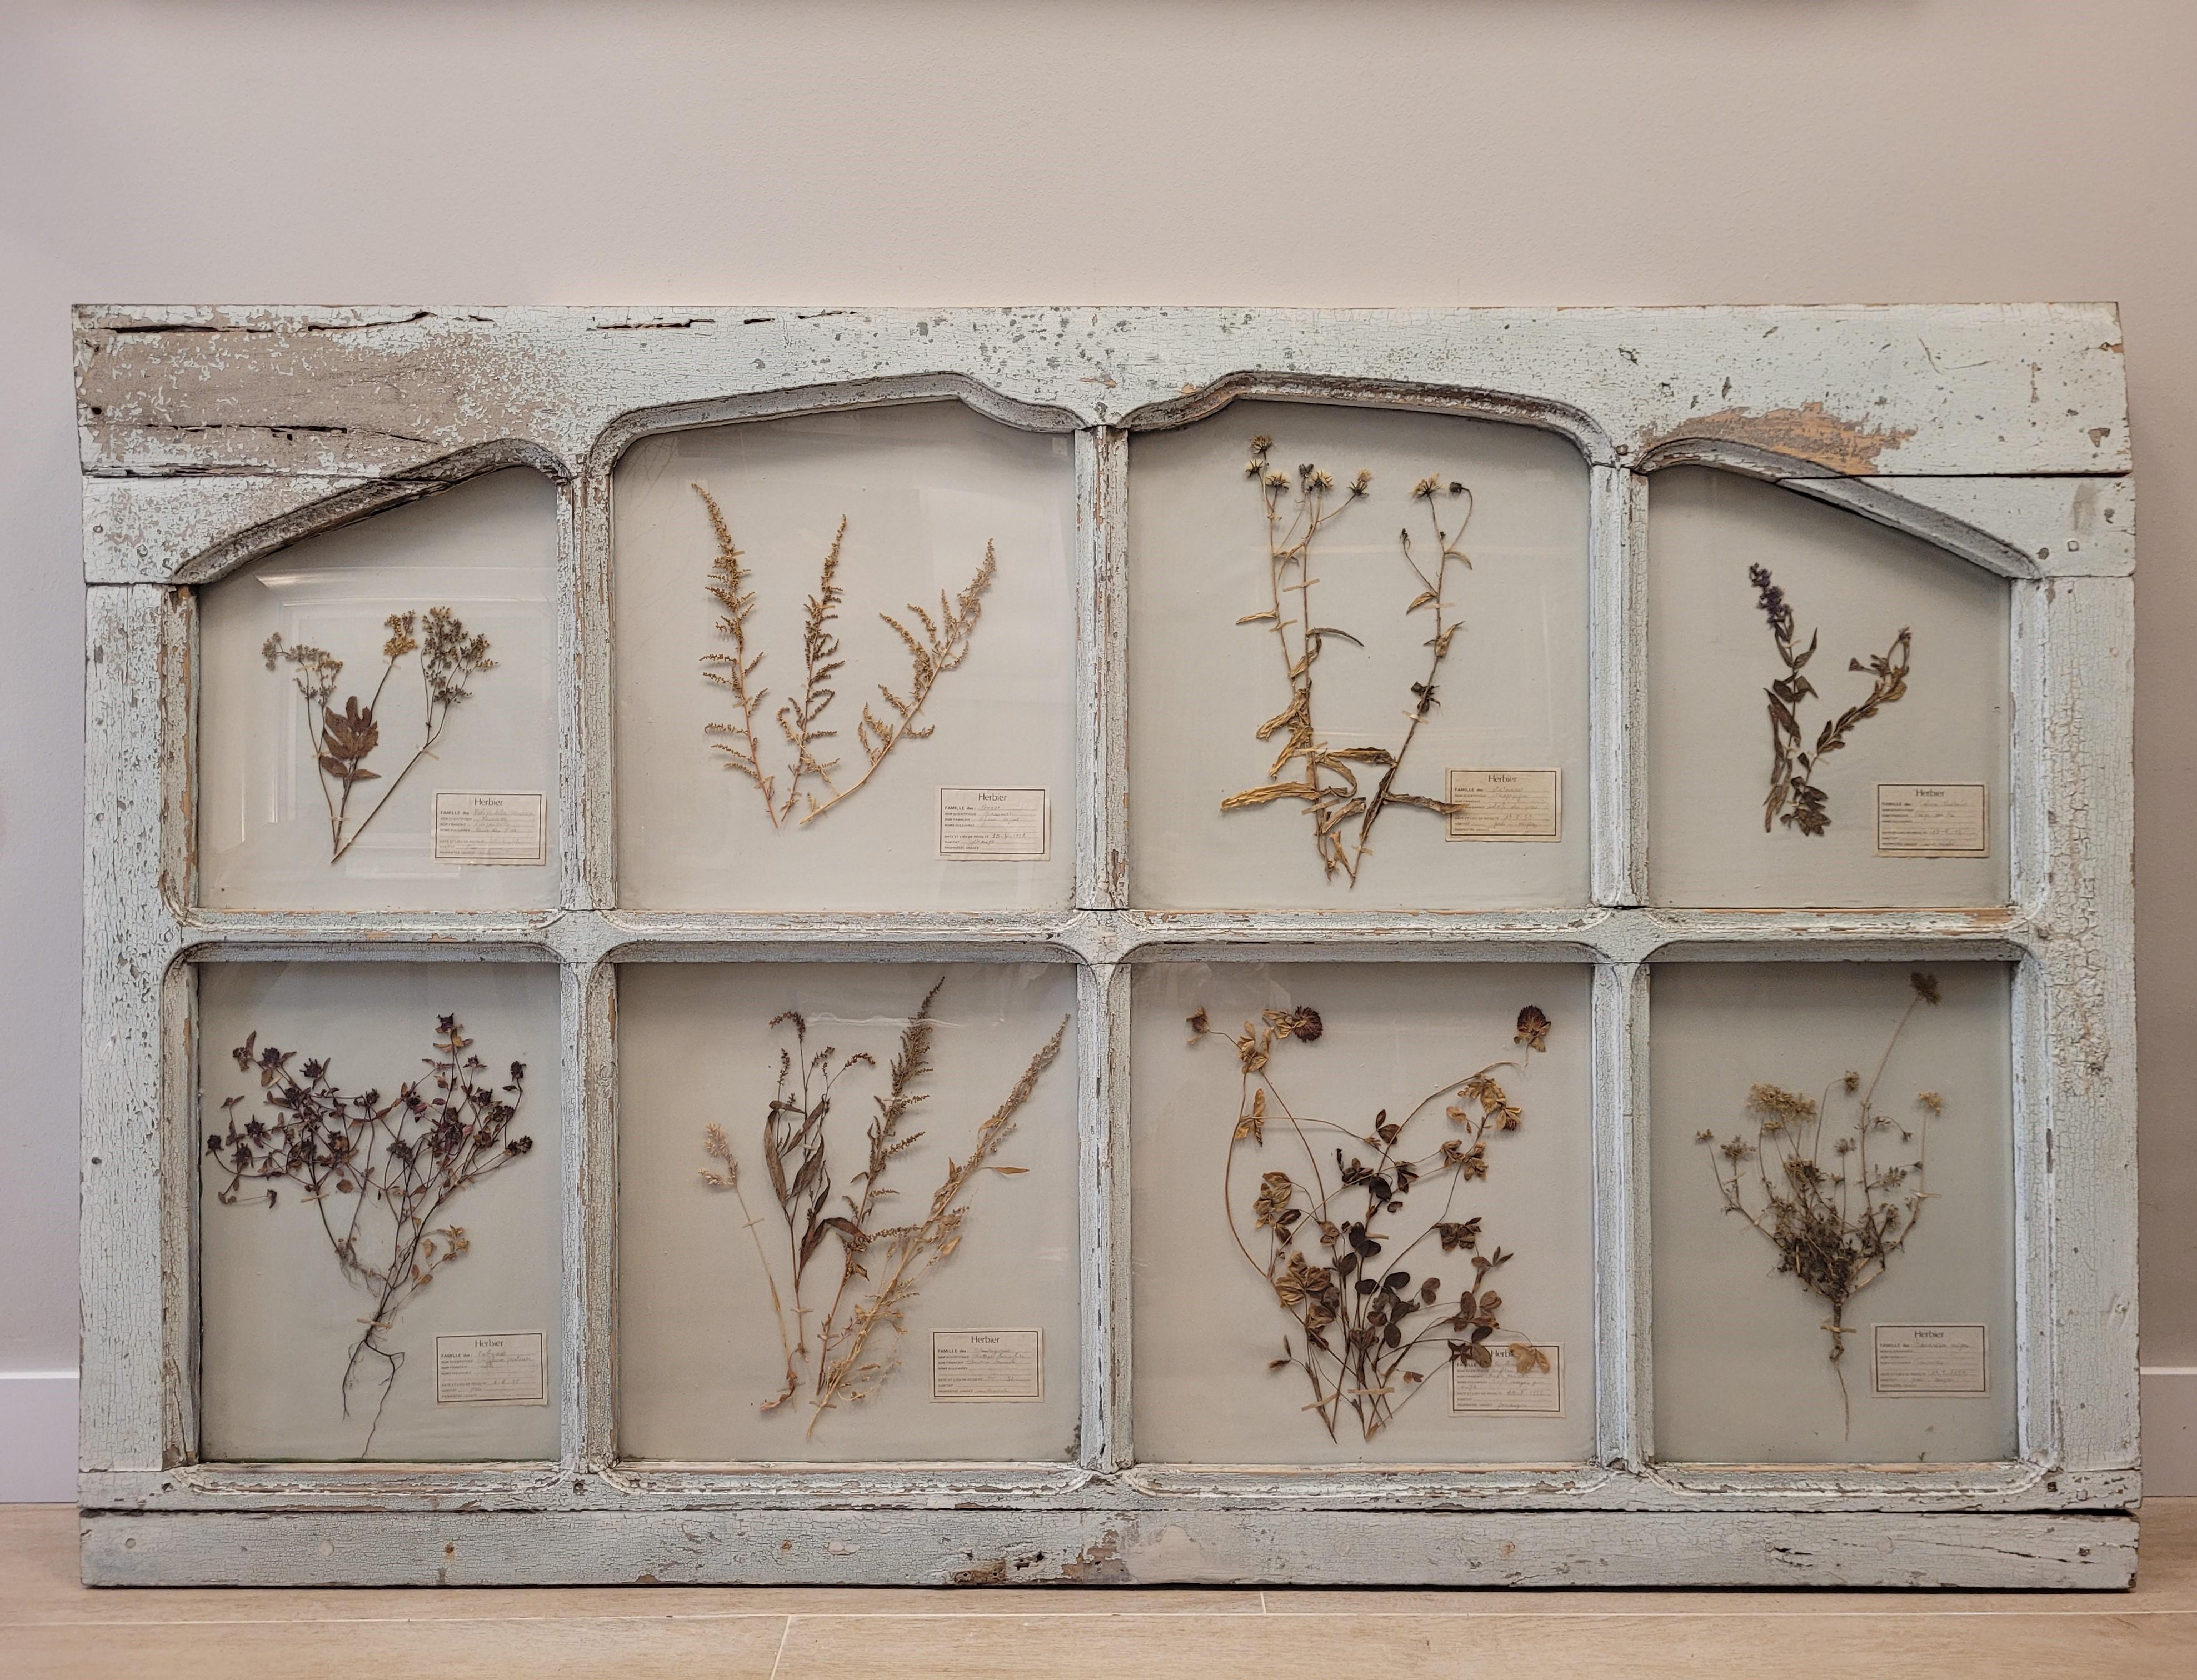 One of a kind Old French Door in Provencal Blue with a  Herbalist or  Pressed Herbs Collection with their description signs on each of them.
Each herb is located in each of the 6 spaces or panels into which the door is divided and configured. A